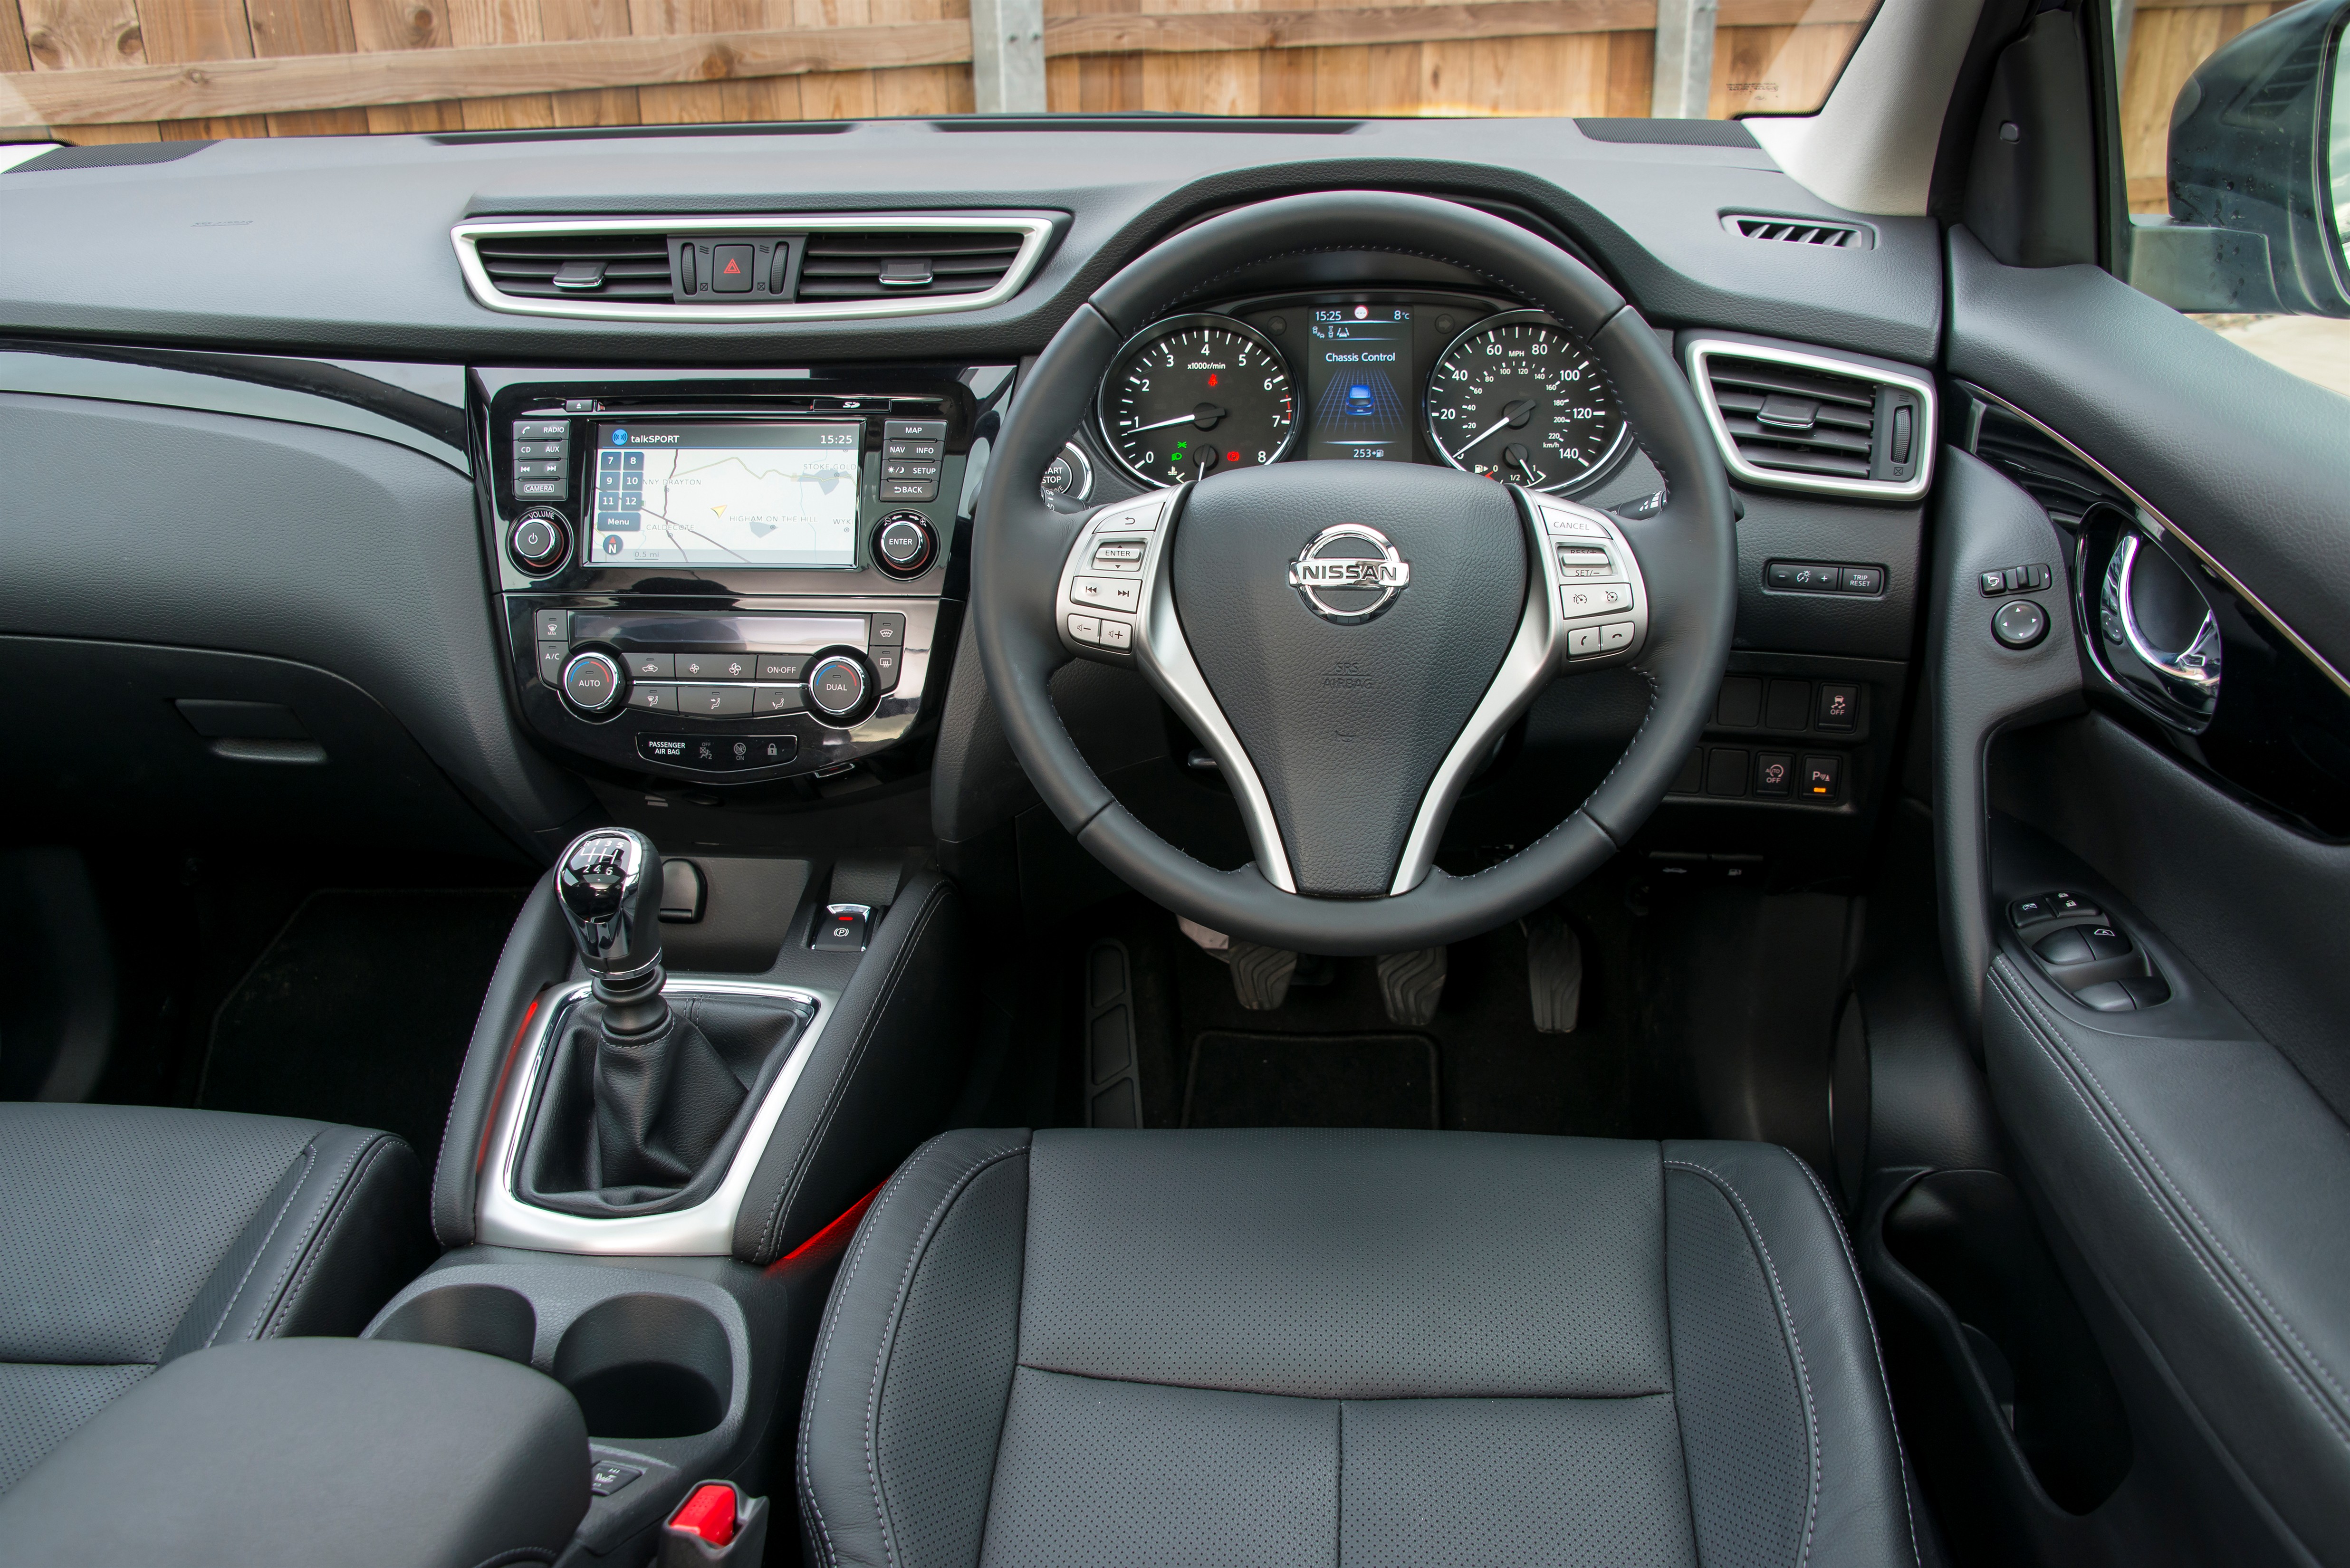 The Nissan's interior isn't as fresh looking as comparable models